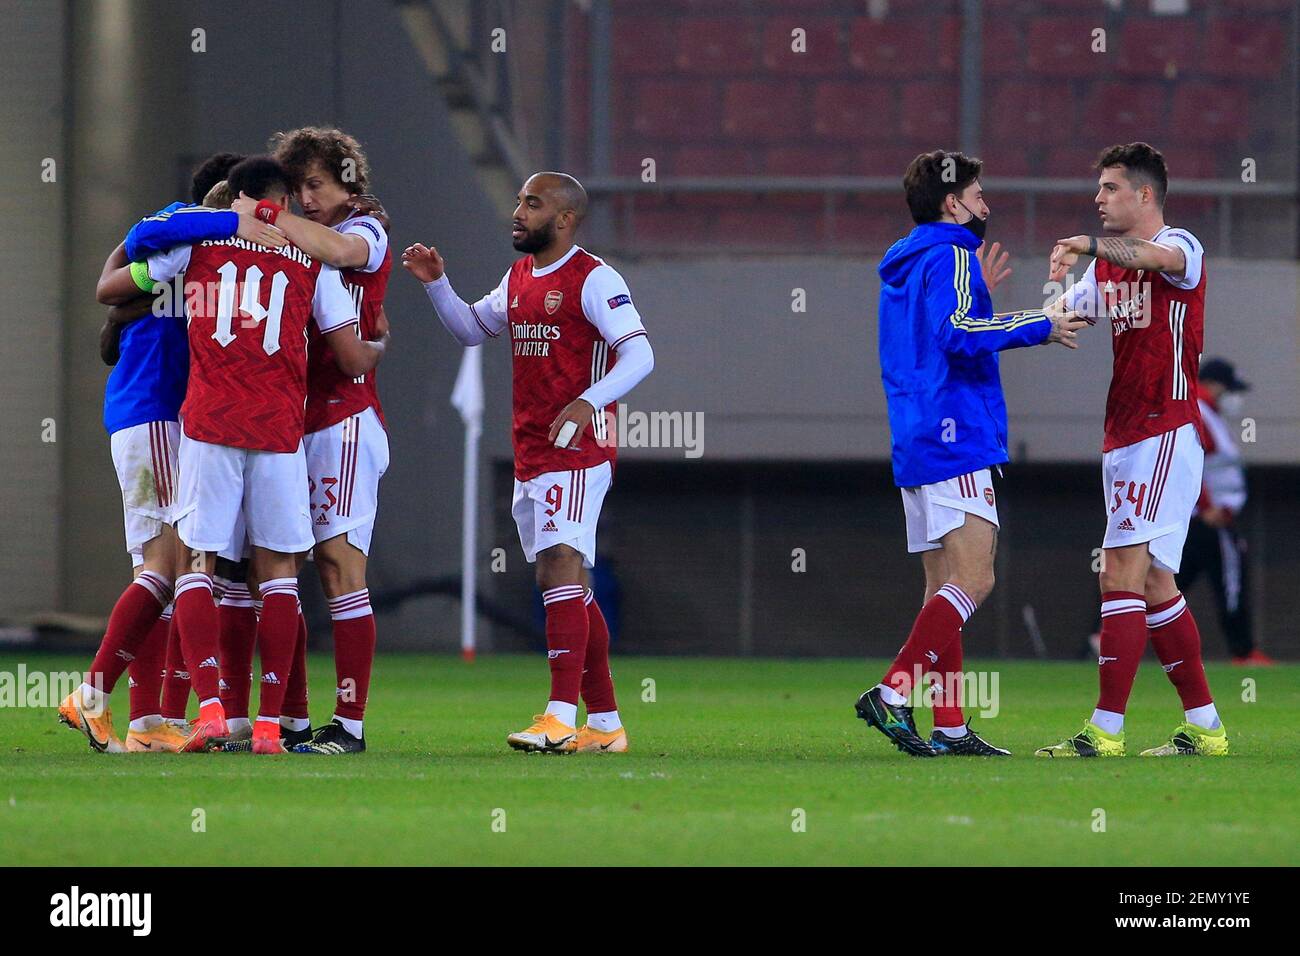 PIRAEUS, GREECE - FEBRUARY 25: Players of Arsenal FC celebrate after the UEFA Europa League Round of 32 match between Arsenal FC and SL Benfica at Karaiskakis Stadium on February 25, 2021 in Piraeus, Greece. (Photo by MB Media) Stock Photo